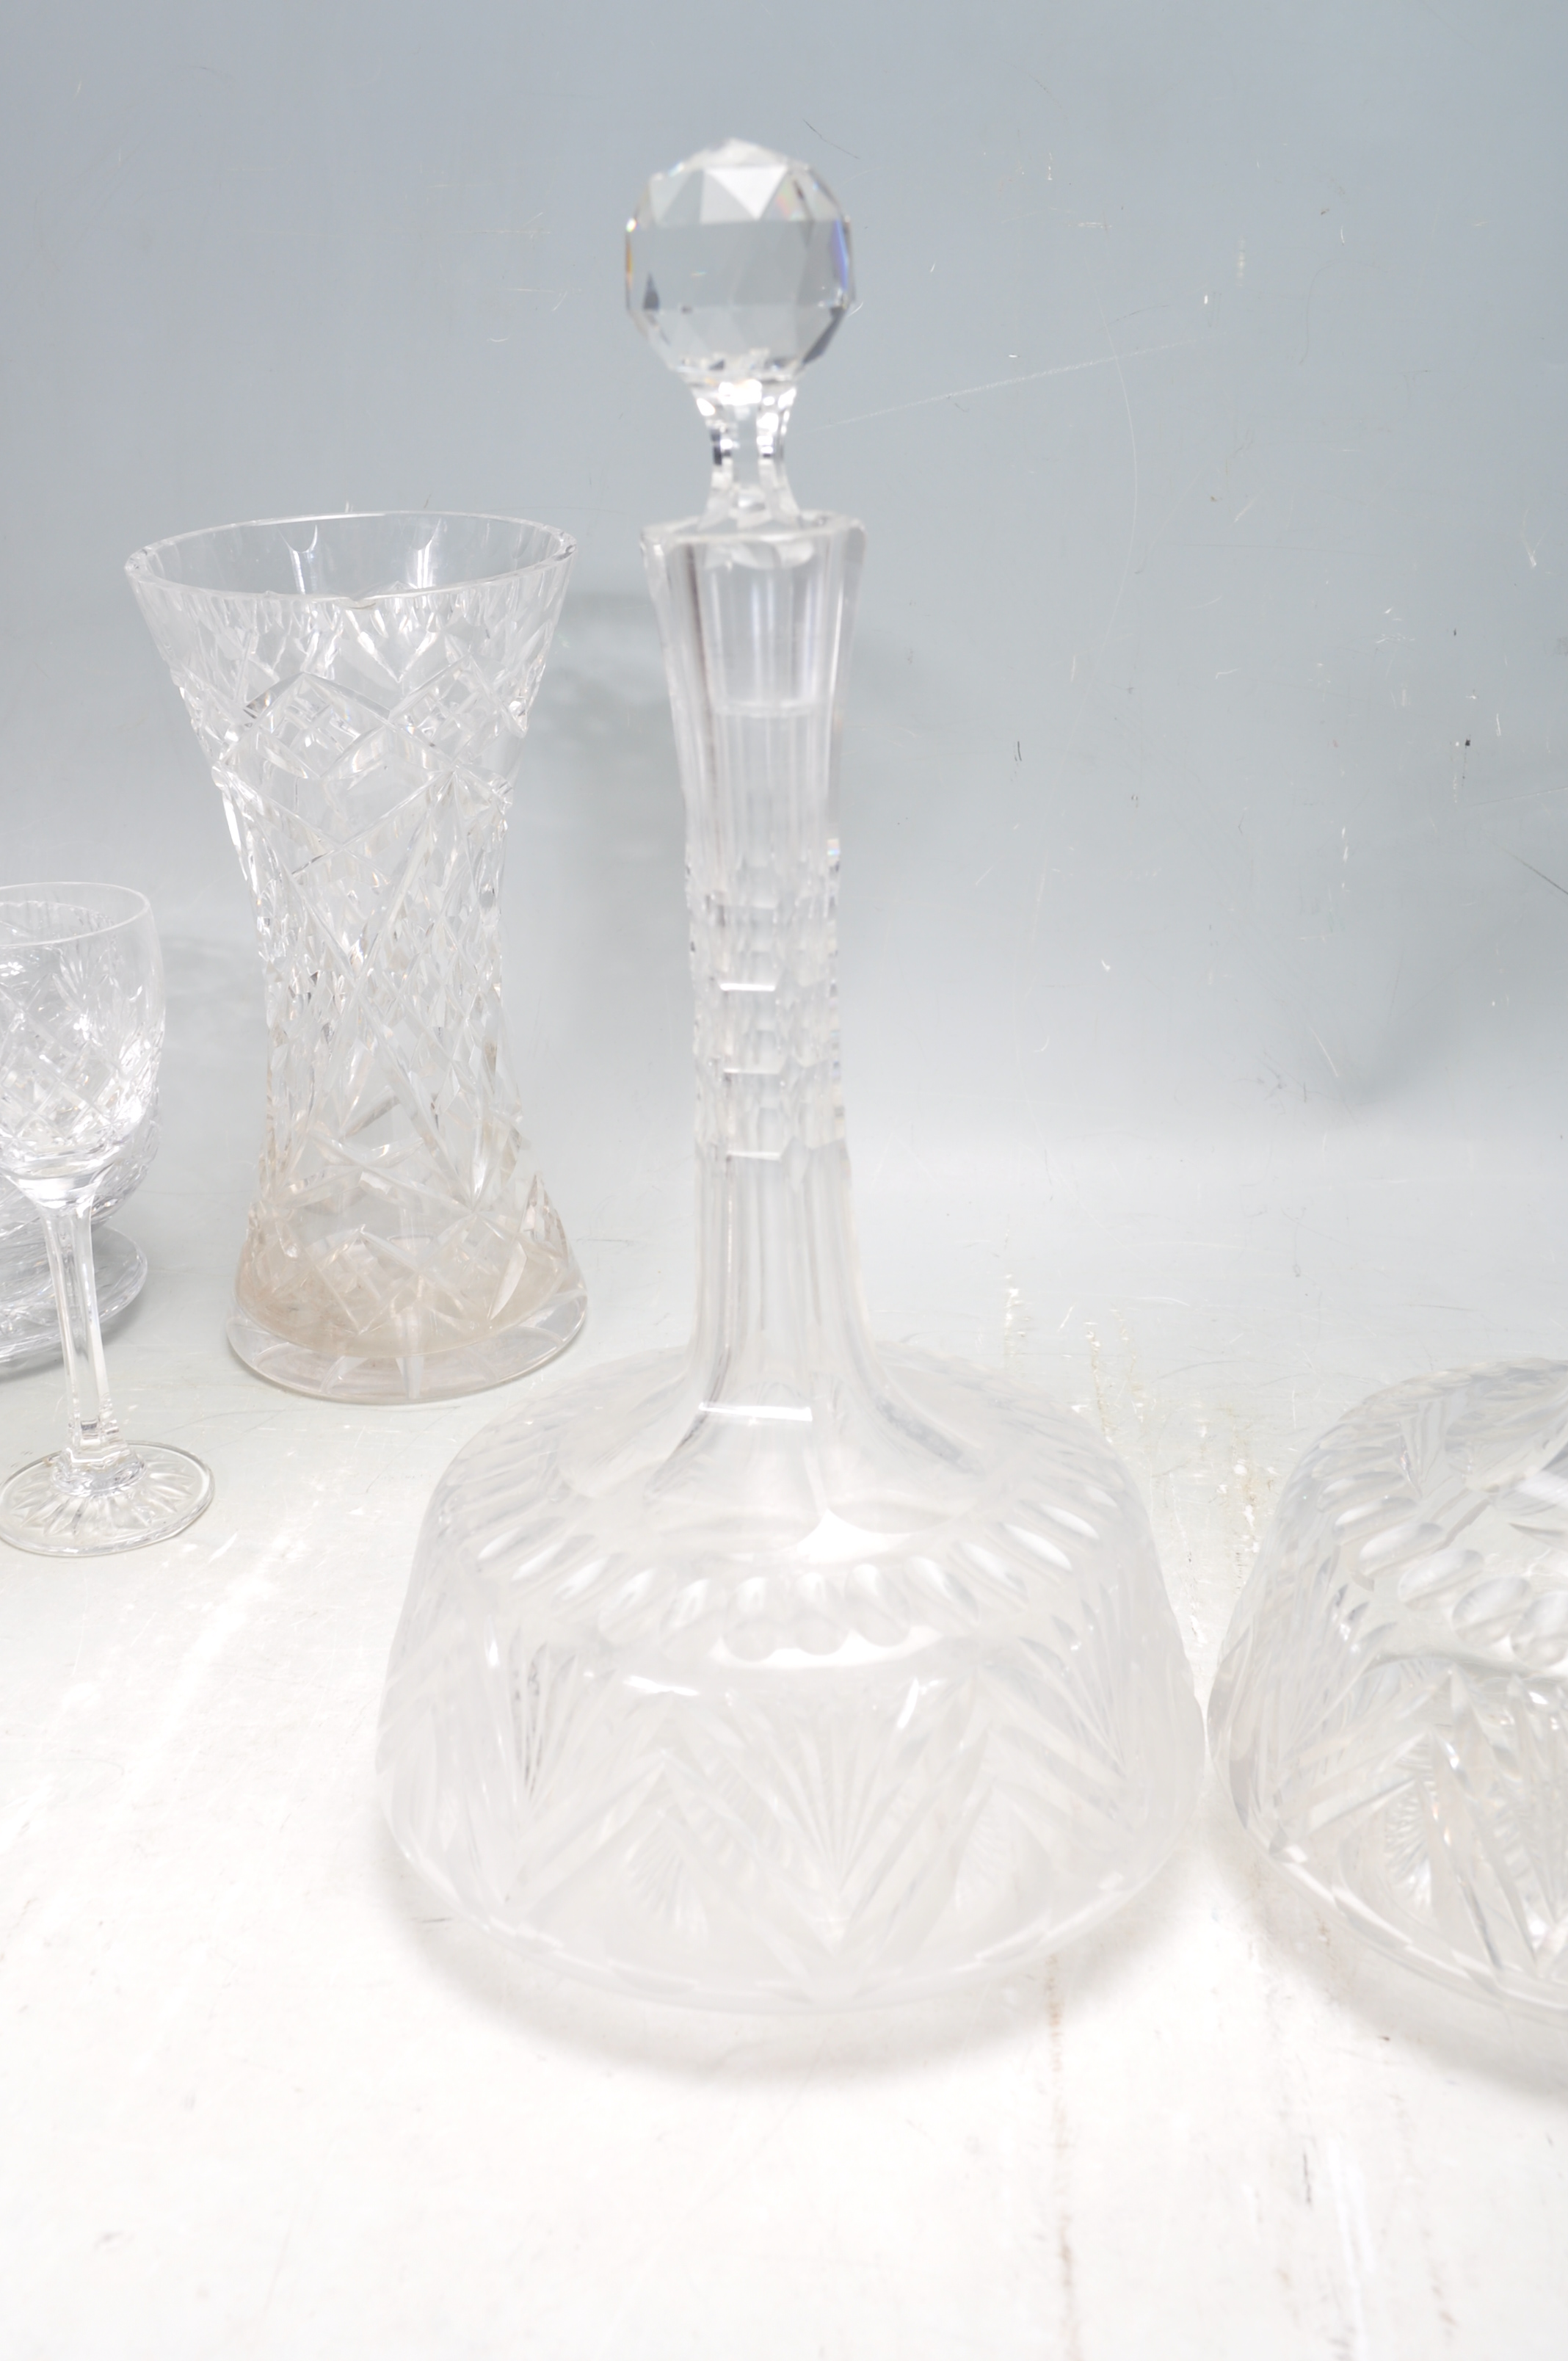 LARGE COLLECTION OF VINTAGE CRYSTAL CUT GLASS WARE - Image 12 of 15